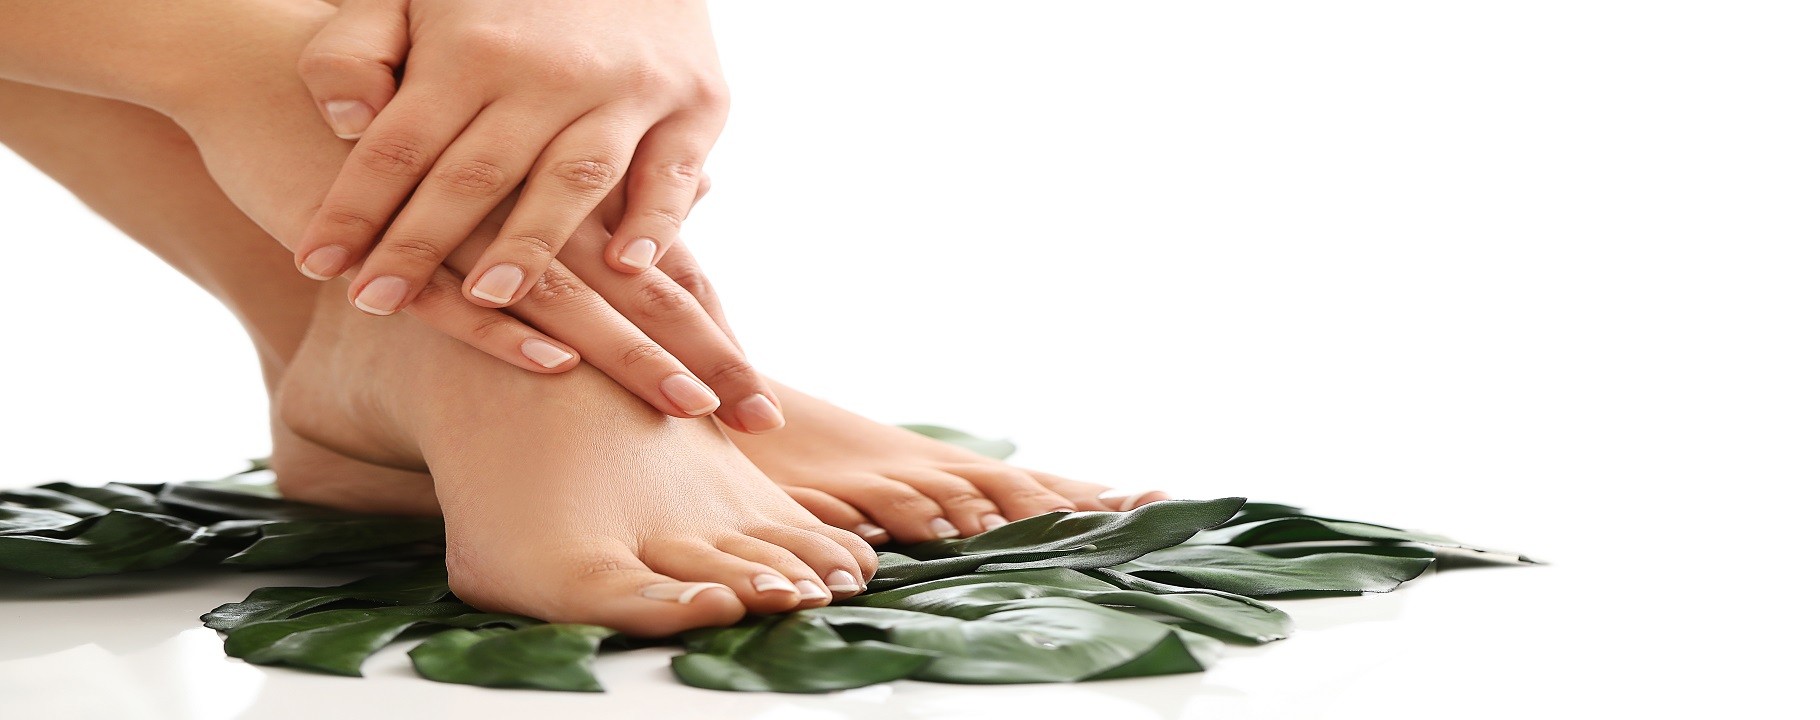 choose the best foot care cream to heal cracked heels